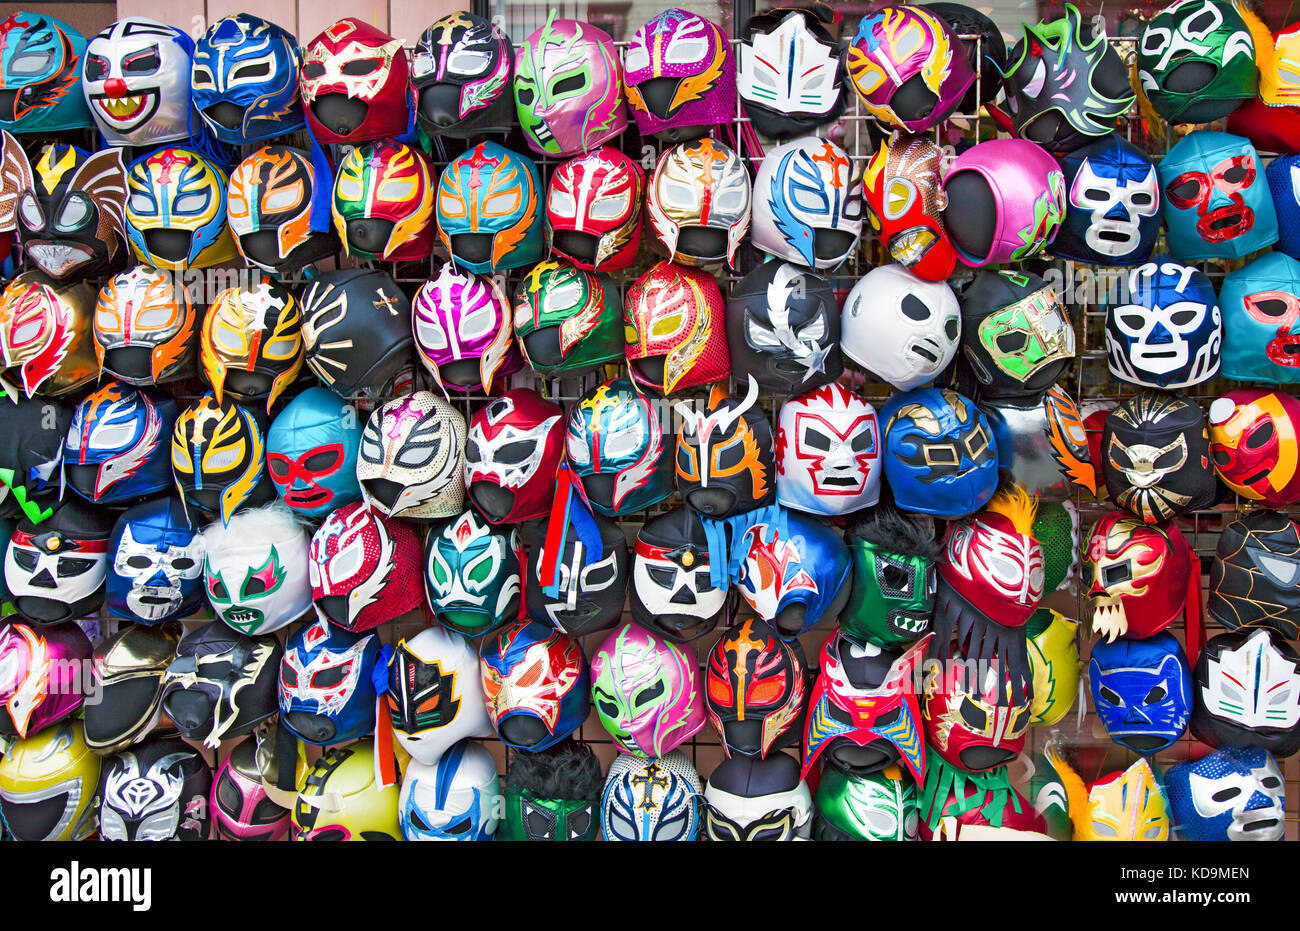 Color display of Mexican free wrestling masks. Stock Photo